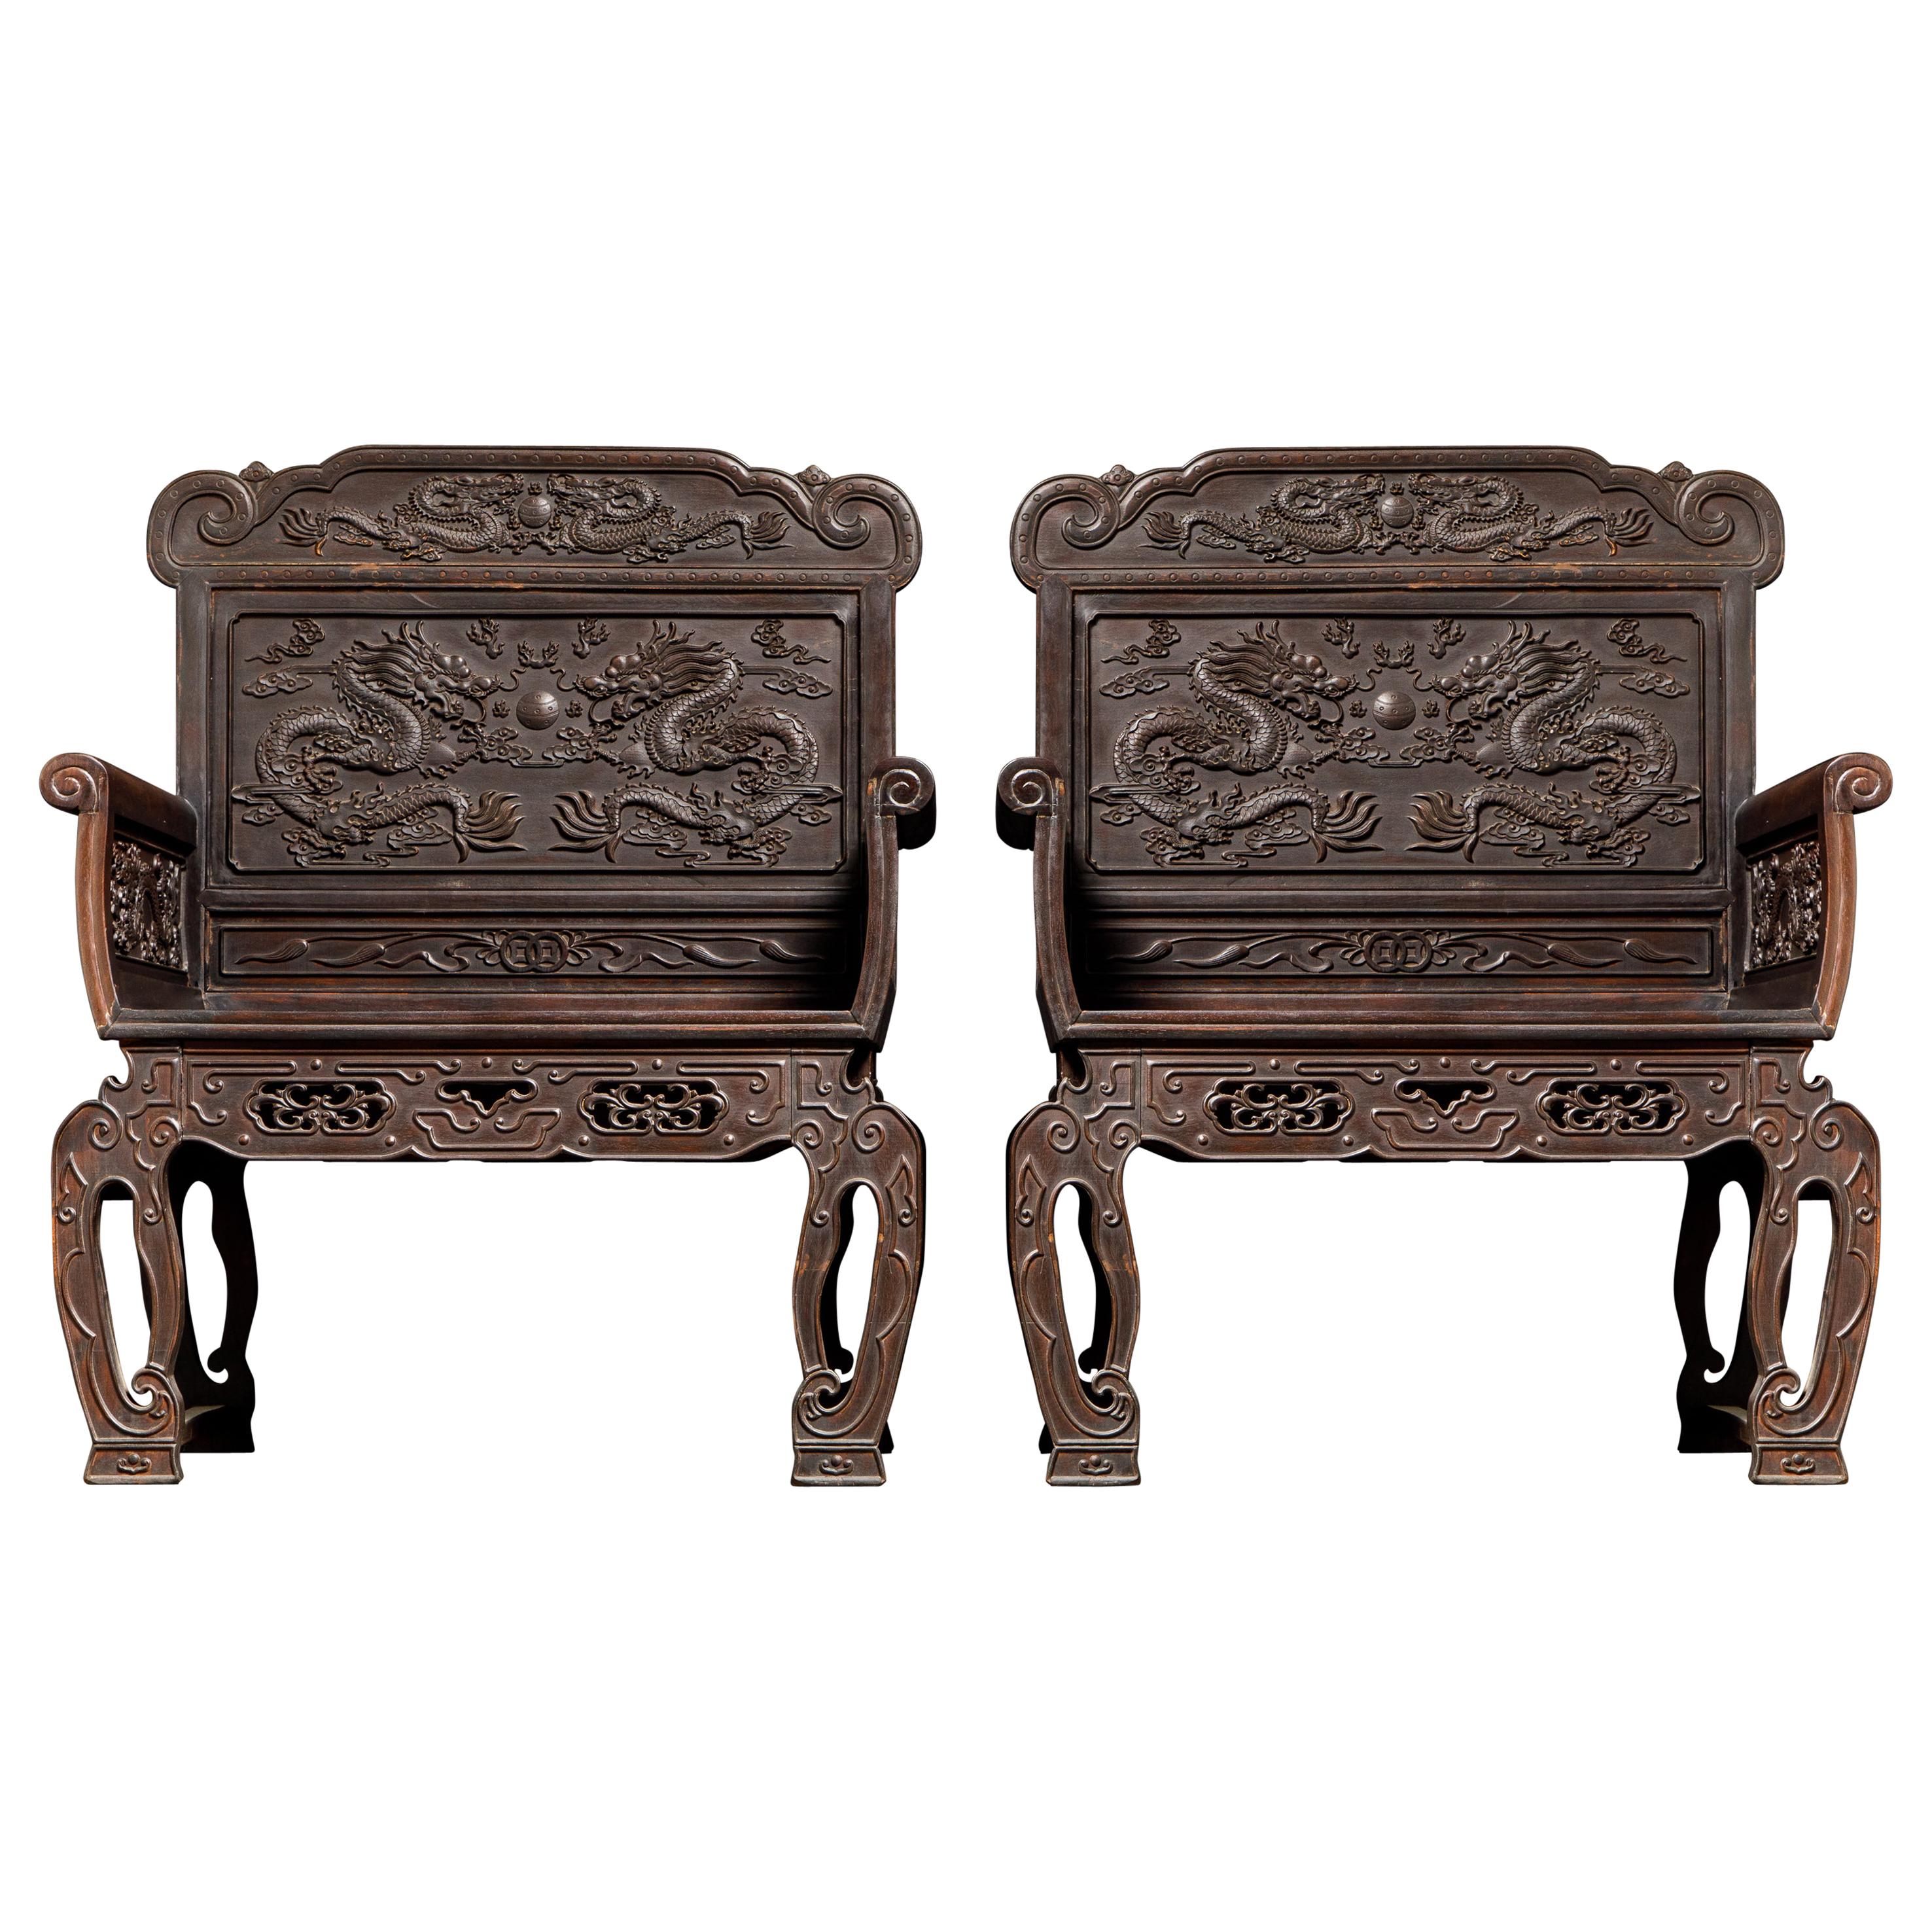 Pair of Carved Chinese Zitan Throne Chairs with Dragon Motifs